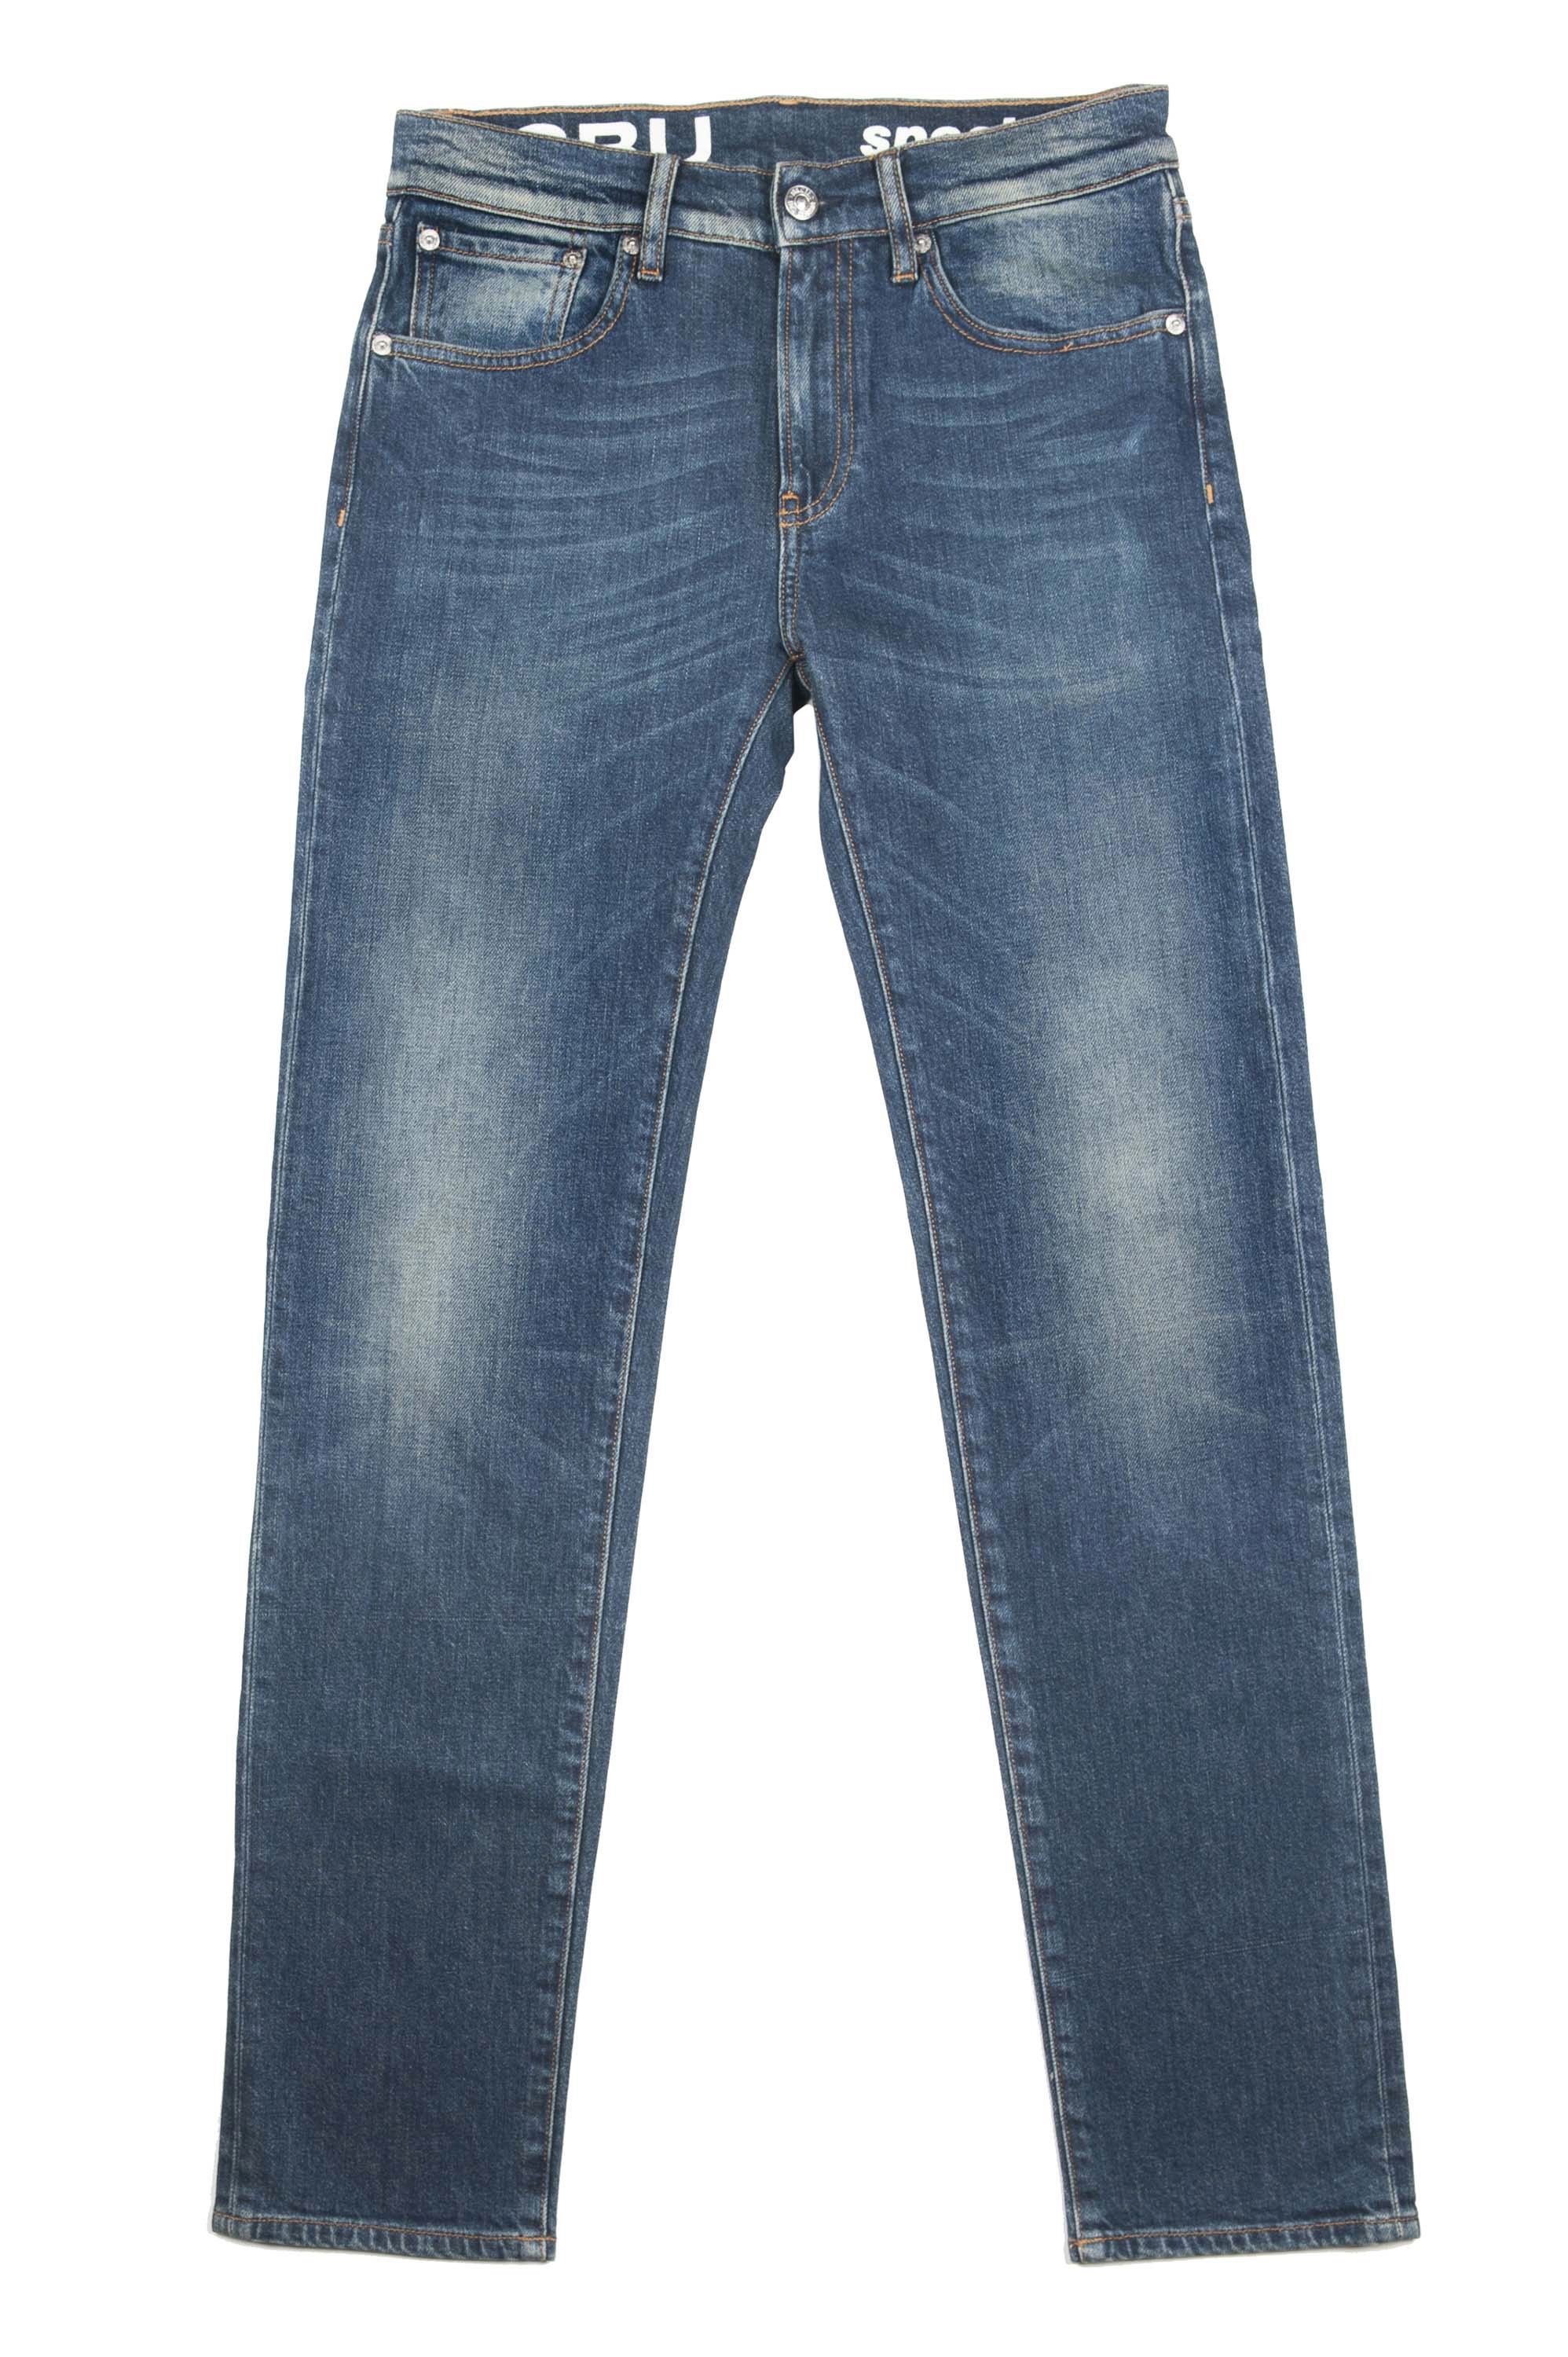 Stone washed jeans